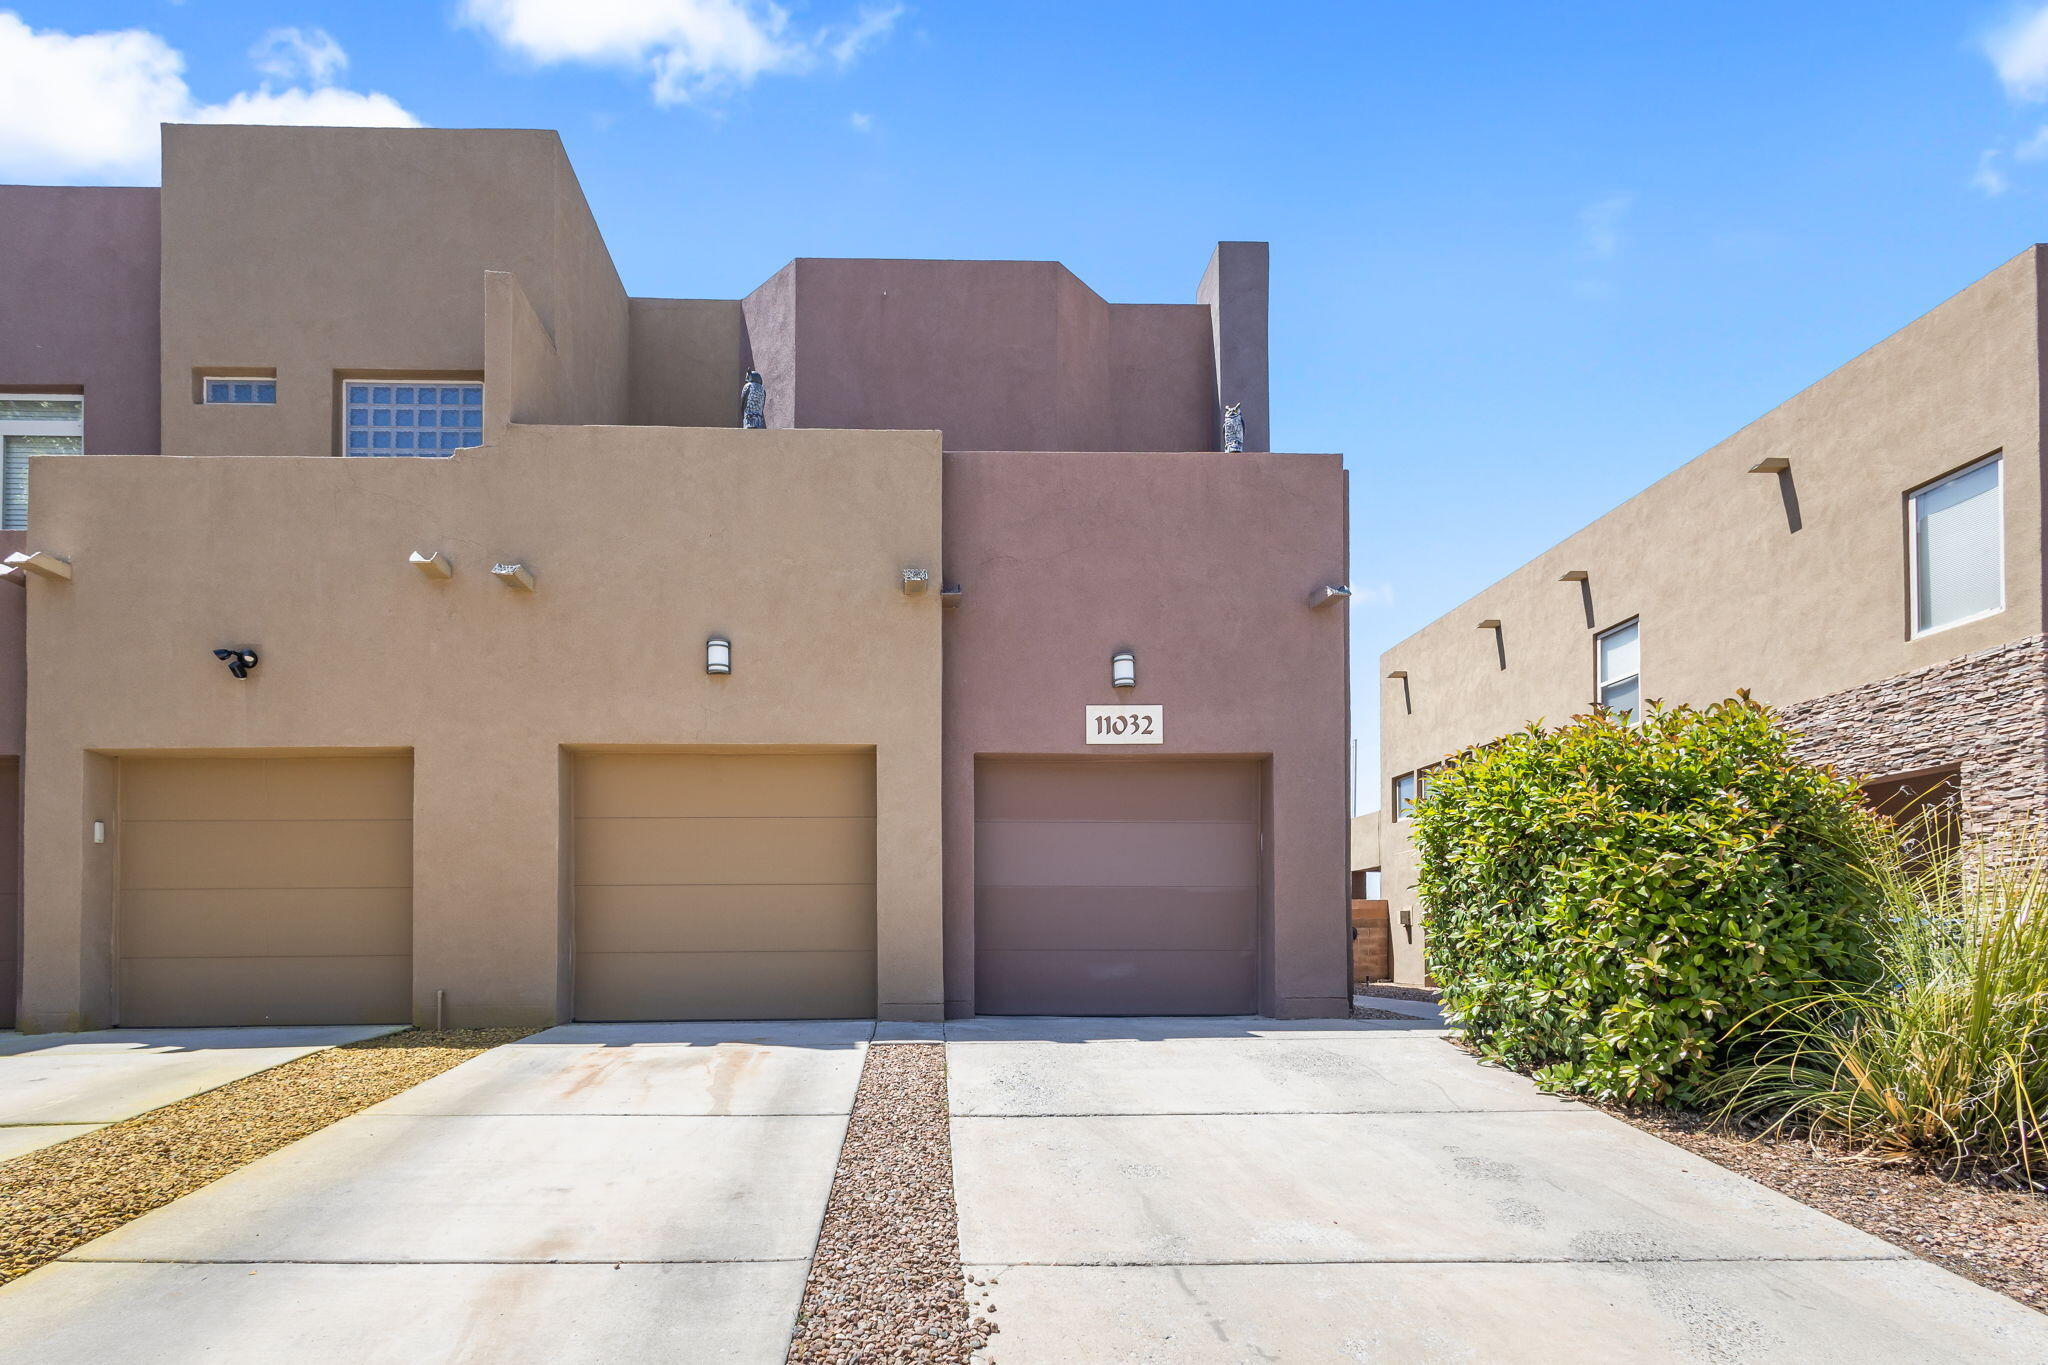 Attn VA buyers - Assumable 2.75% interest rate!Welcome to this beautiful townhouse minutes away from Kirtland AFB & Sandia National Labs! This stunning home features 4 bedrooms, 2.5 baths & an open loft that includes a walk out deck. New AC! Low-E top quality windows keep this home efficient & quiet. 2 car garage, separate laundry room with gas/electric W/D hookups, near end of Cul-De-Sac with amazing views of the Sandia & Manzano Mountains. This home has it all, schedule your showing today!